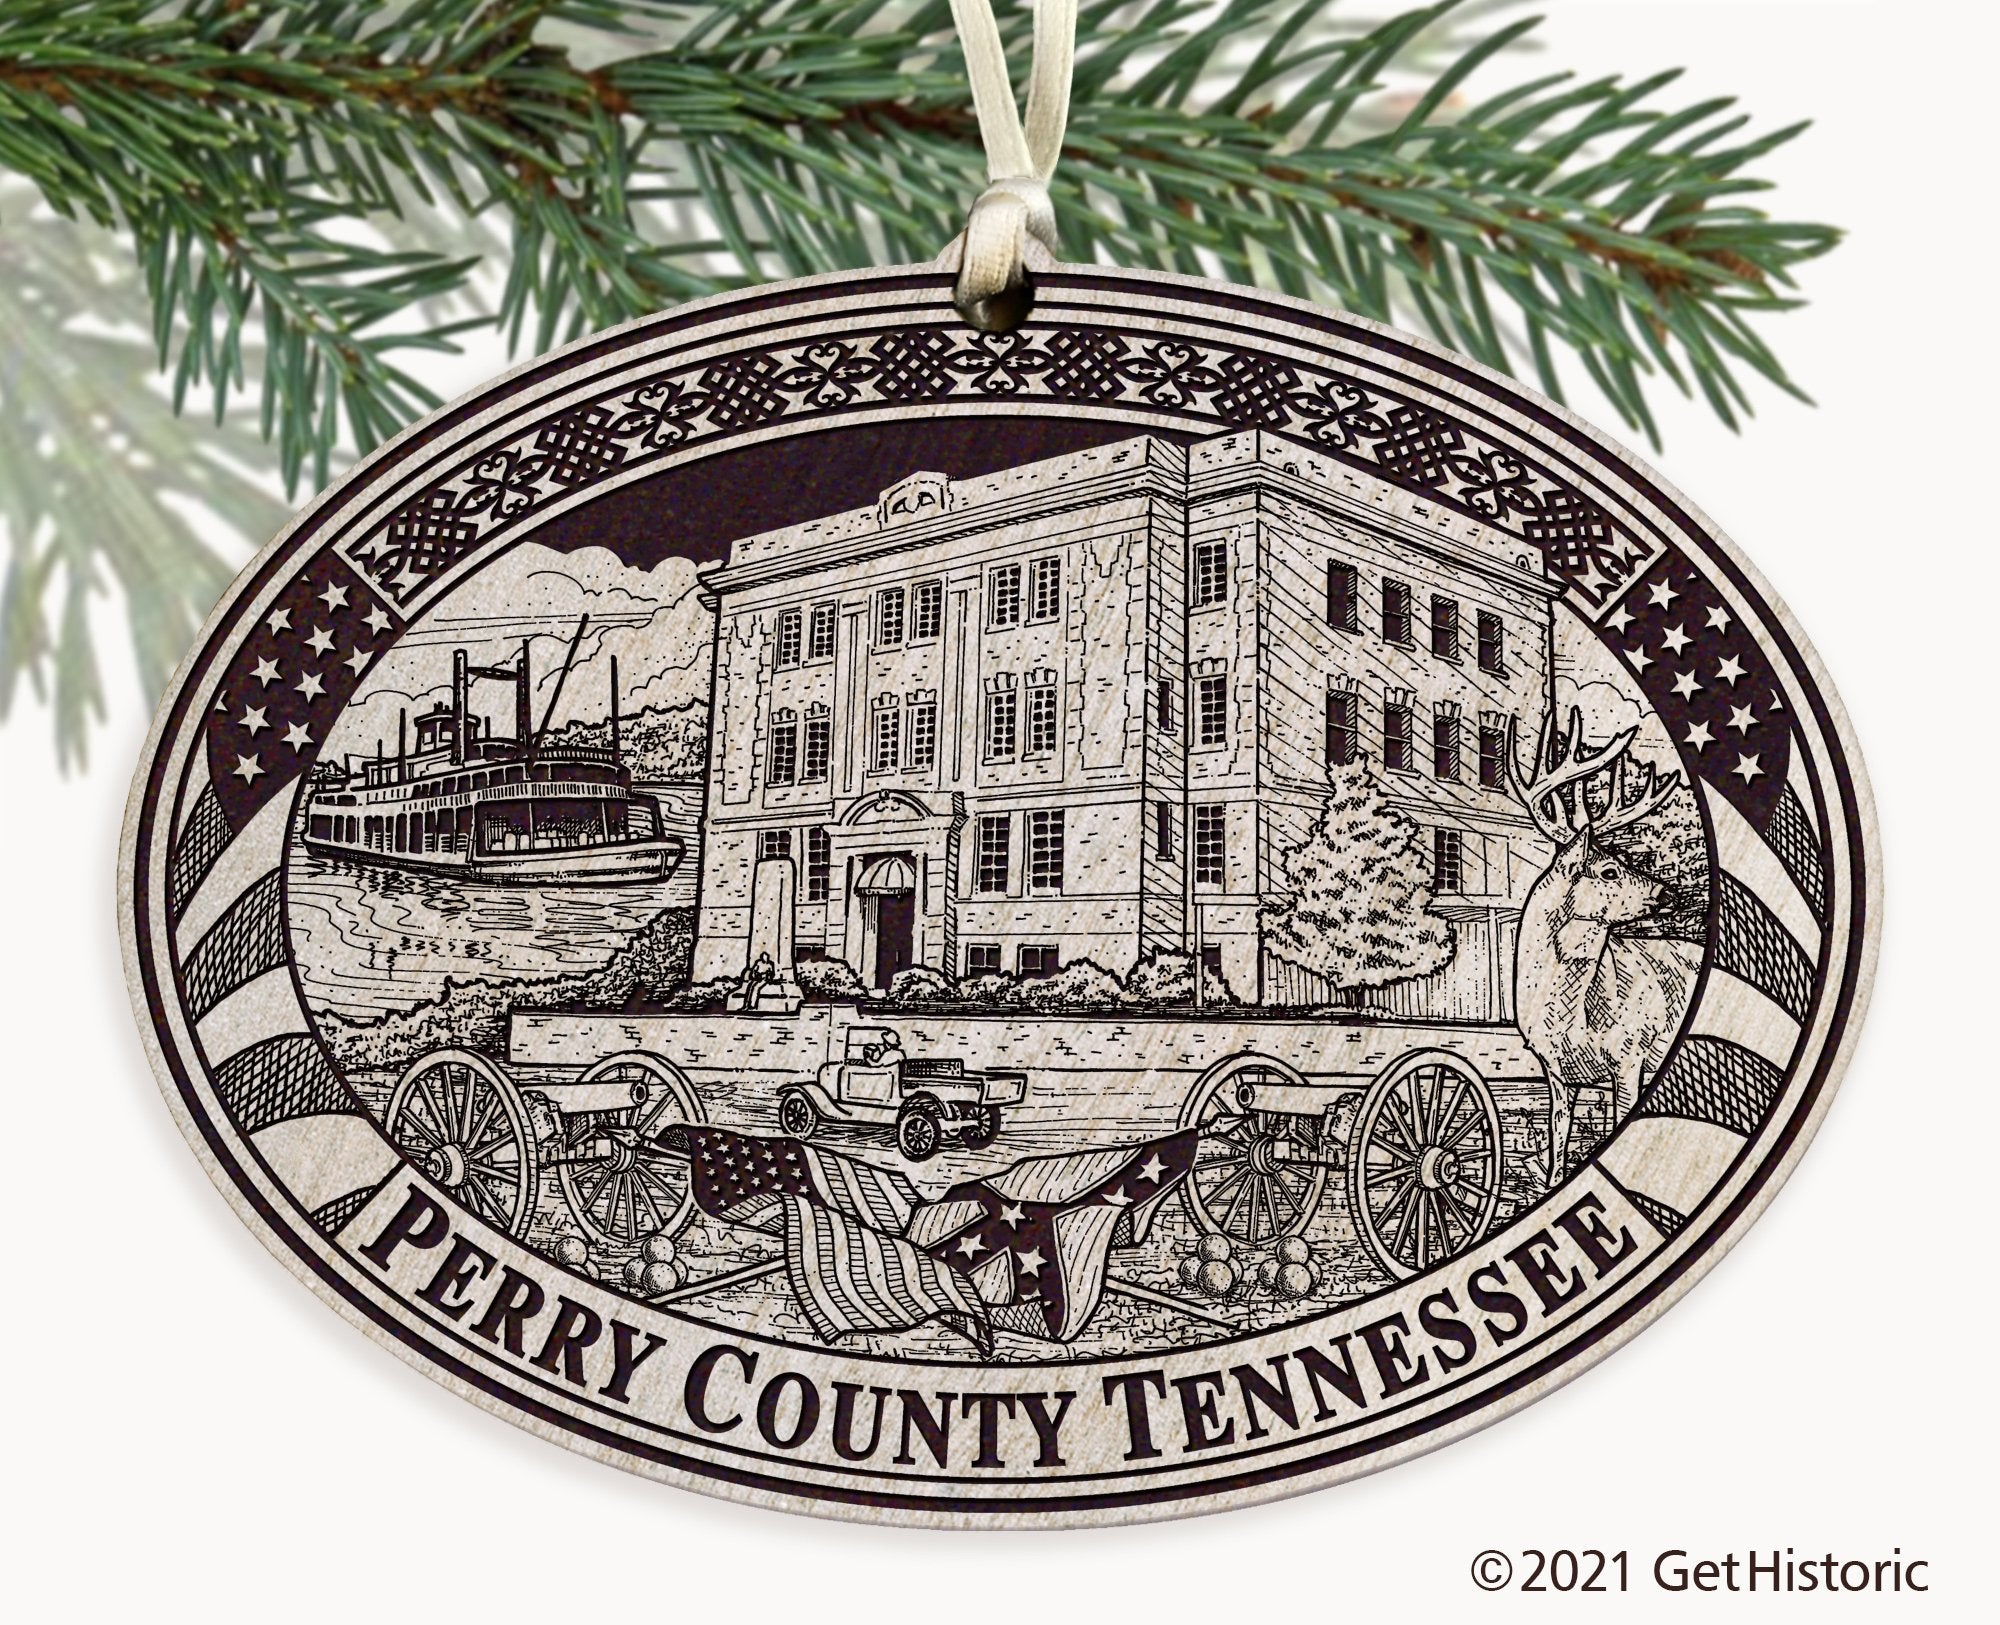 Perry County Tennessee Engraved Ornament